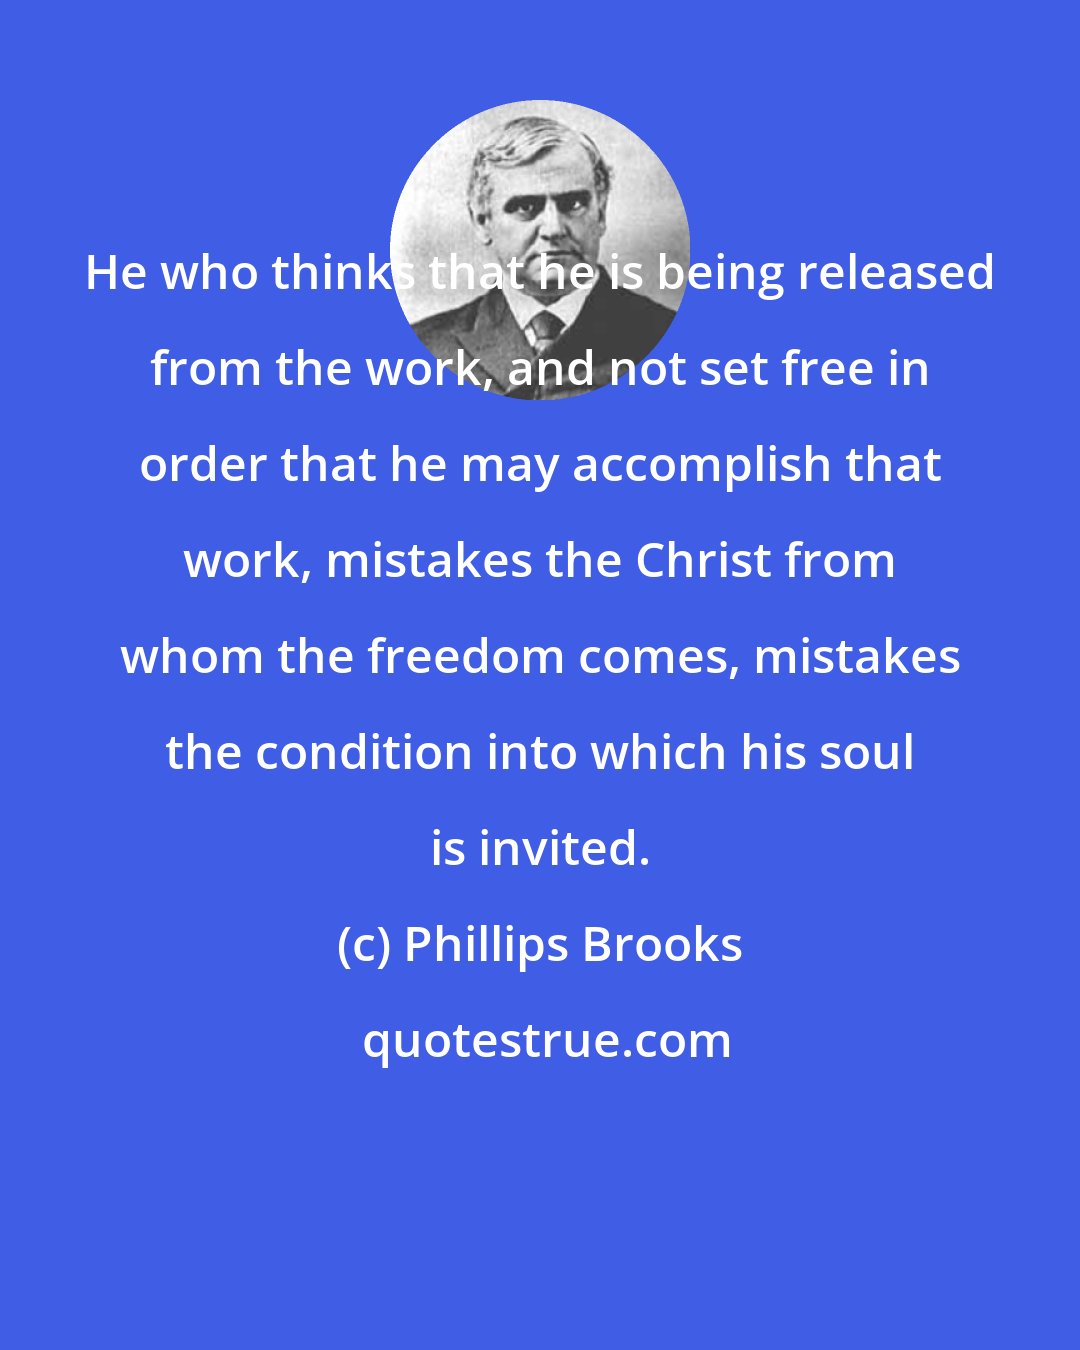 Phillips Brooks: He who thinks that he is being released from the work, and not set free in order that he may accomplish that work, mistakes the Christ from whom the freedom comes, mistakes the condition into which his soul is invited.